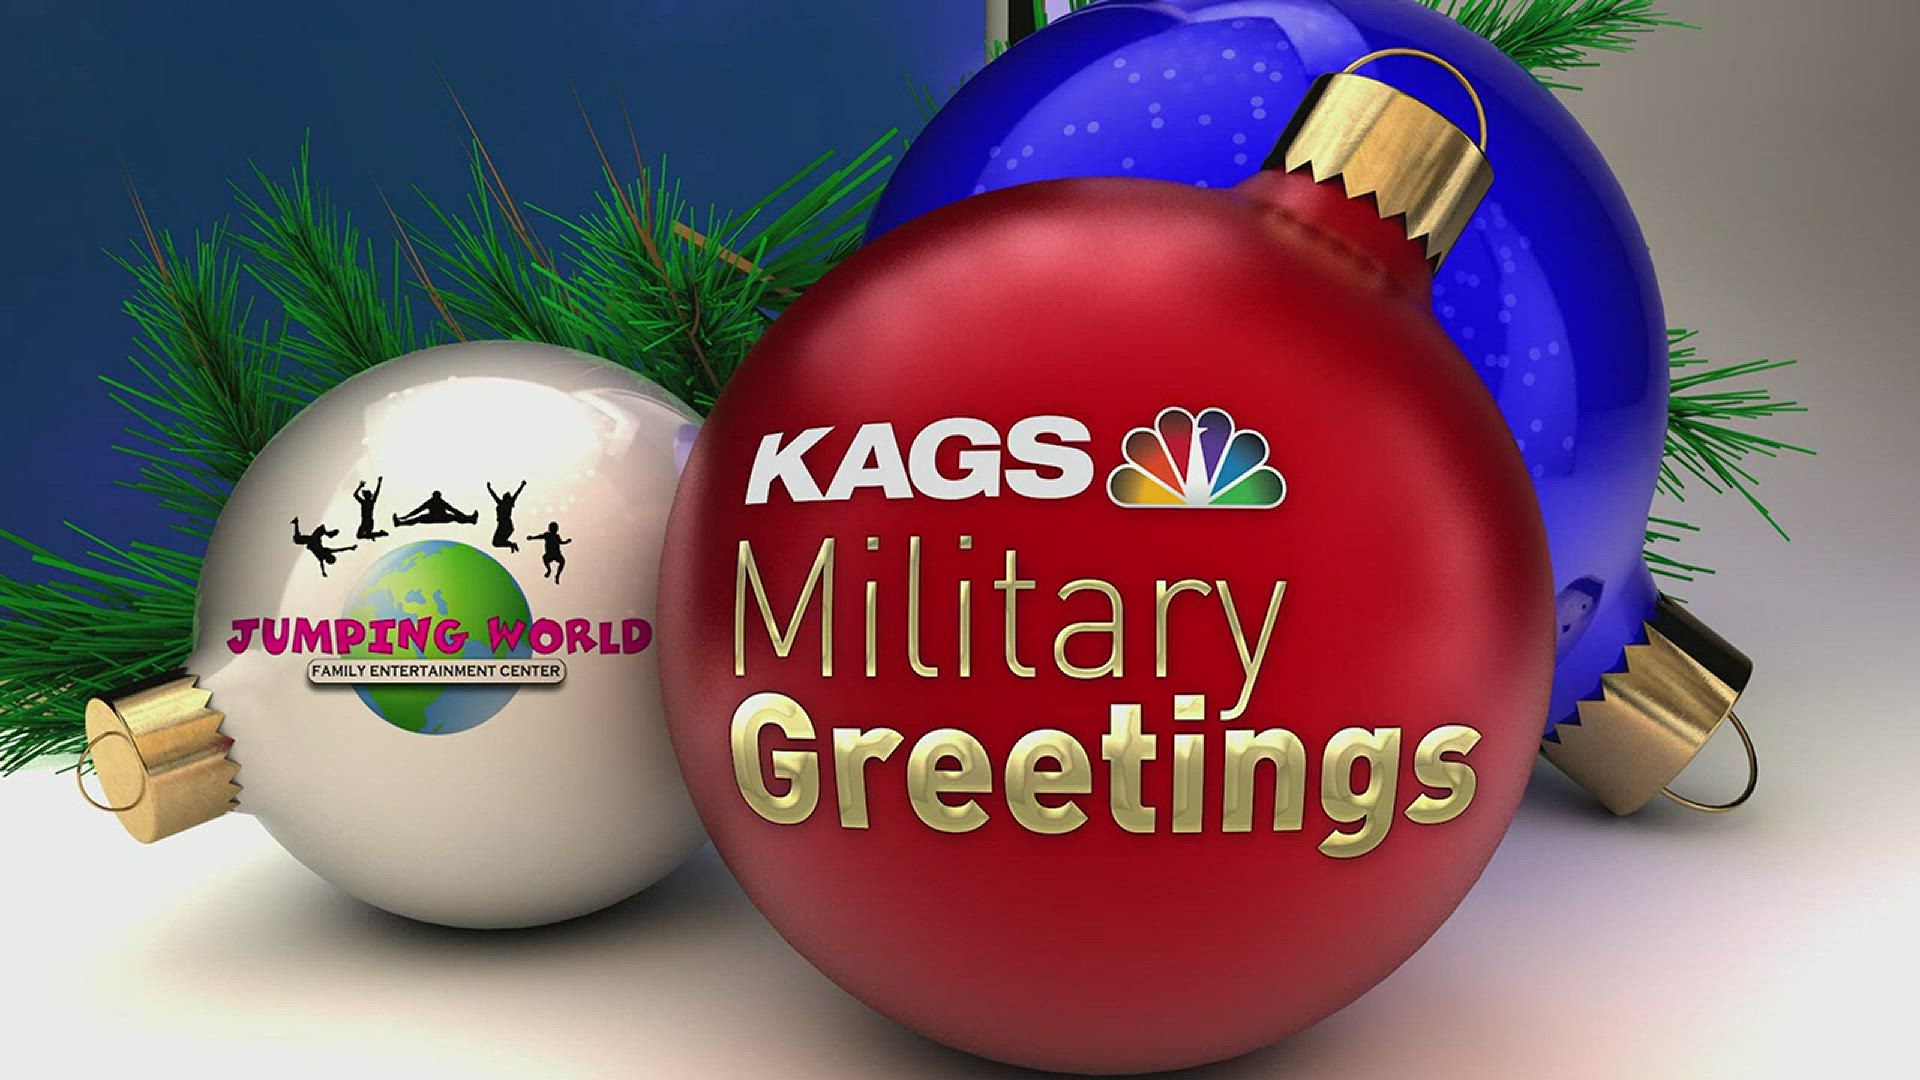 Jumping World presents Military greetings from A1C Jason Mark Saiz and CDR Tom Sandoval